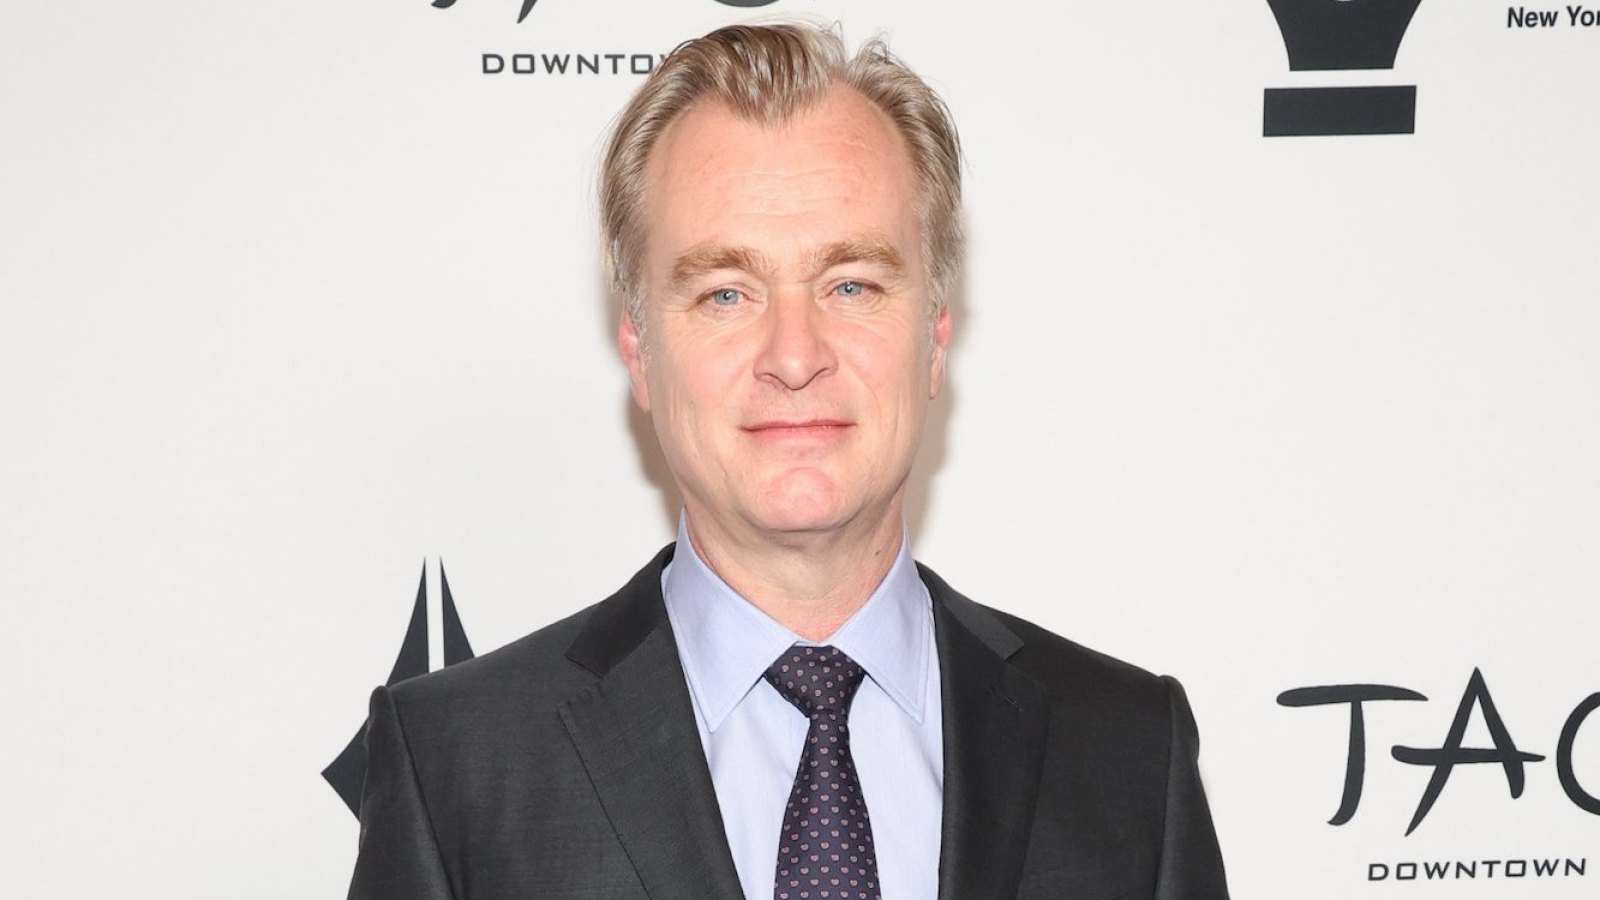 Christopher Nolan s Peloton Instructor Insulted One Of His Films During a Workout